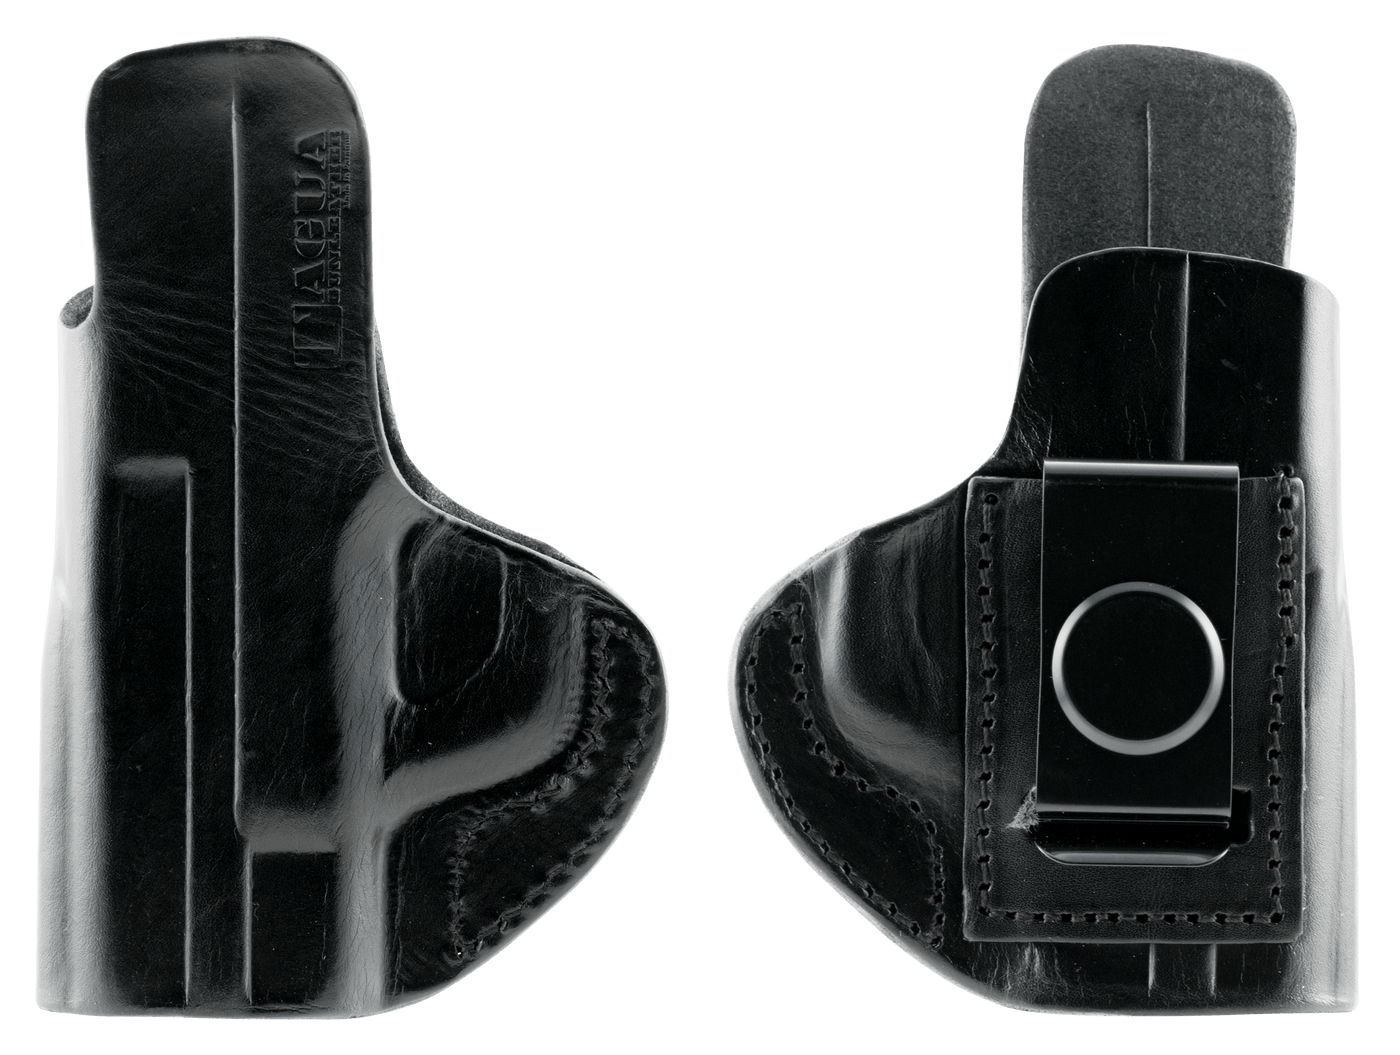 Tagua Tagua Iph In/pant M&p Shield Rh Blk Holsters